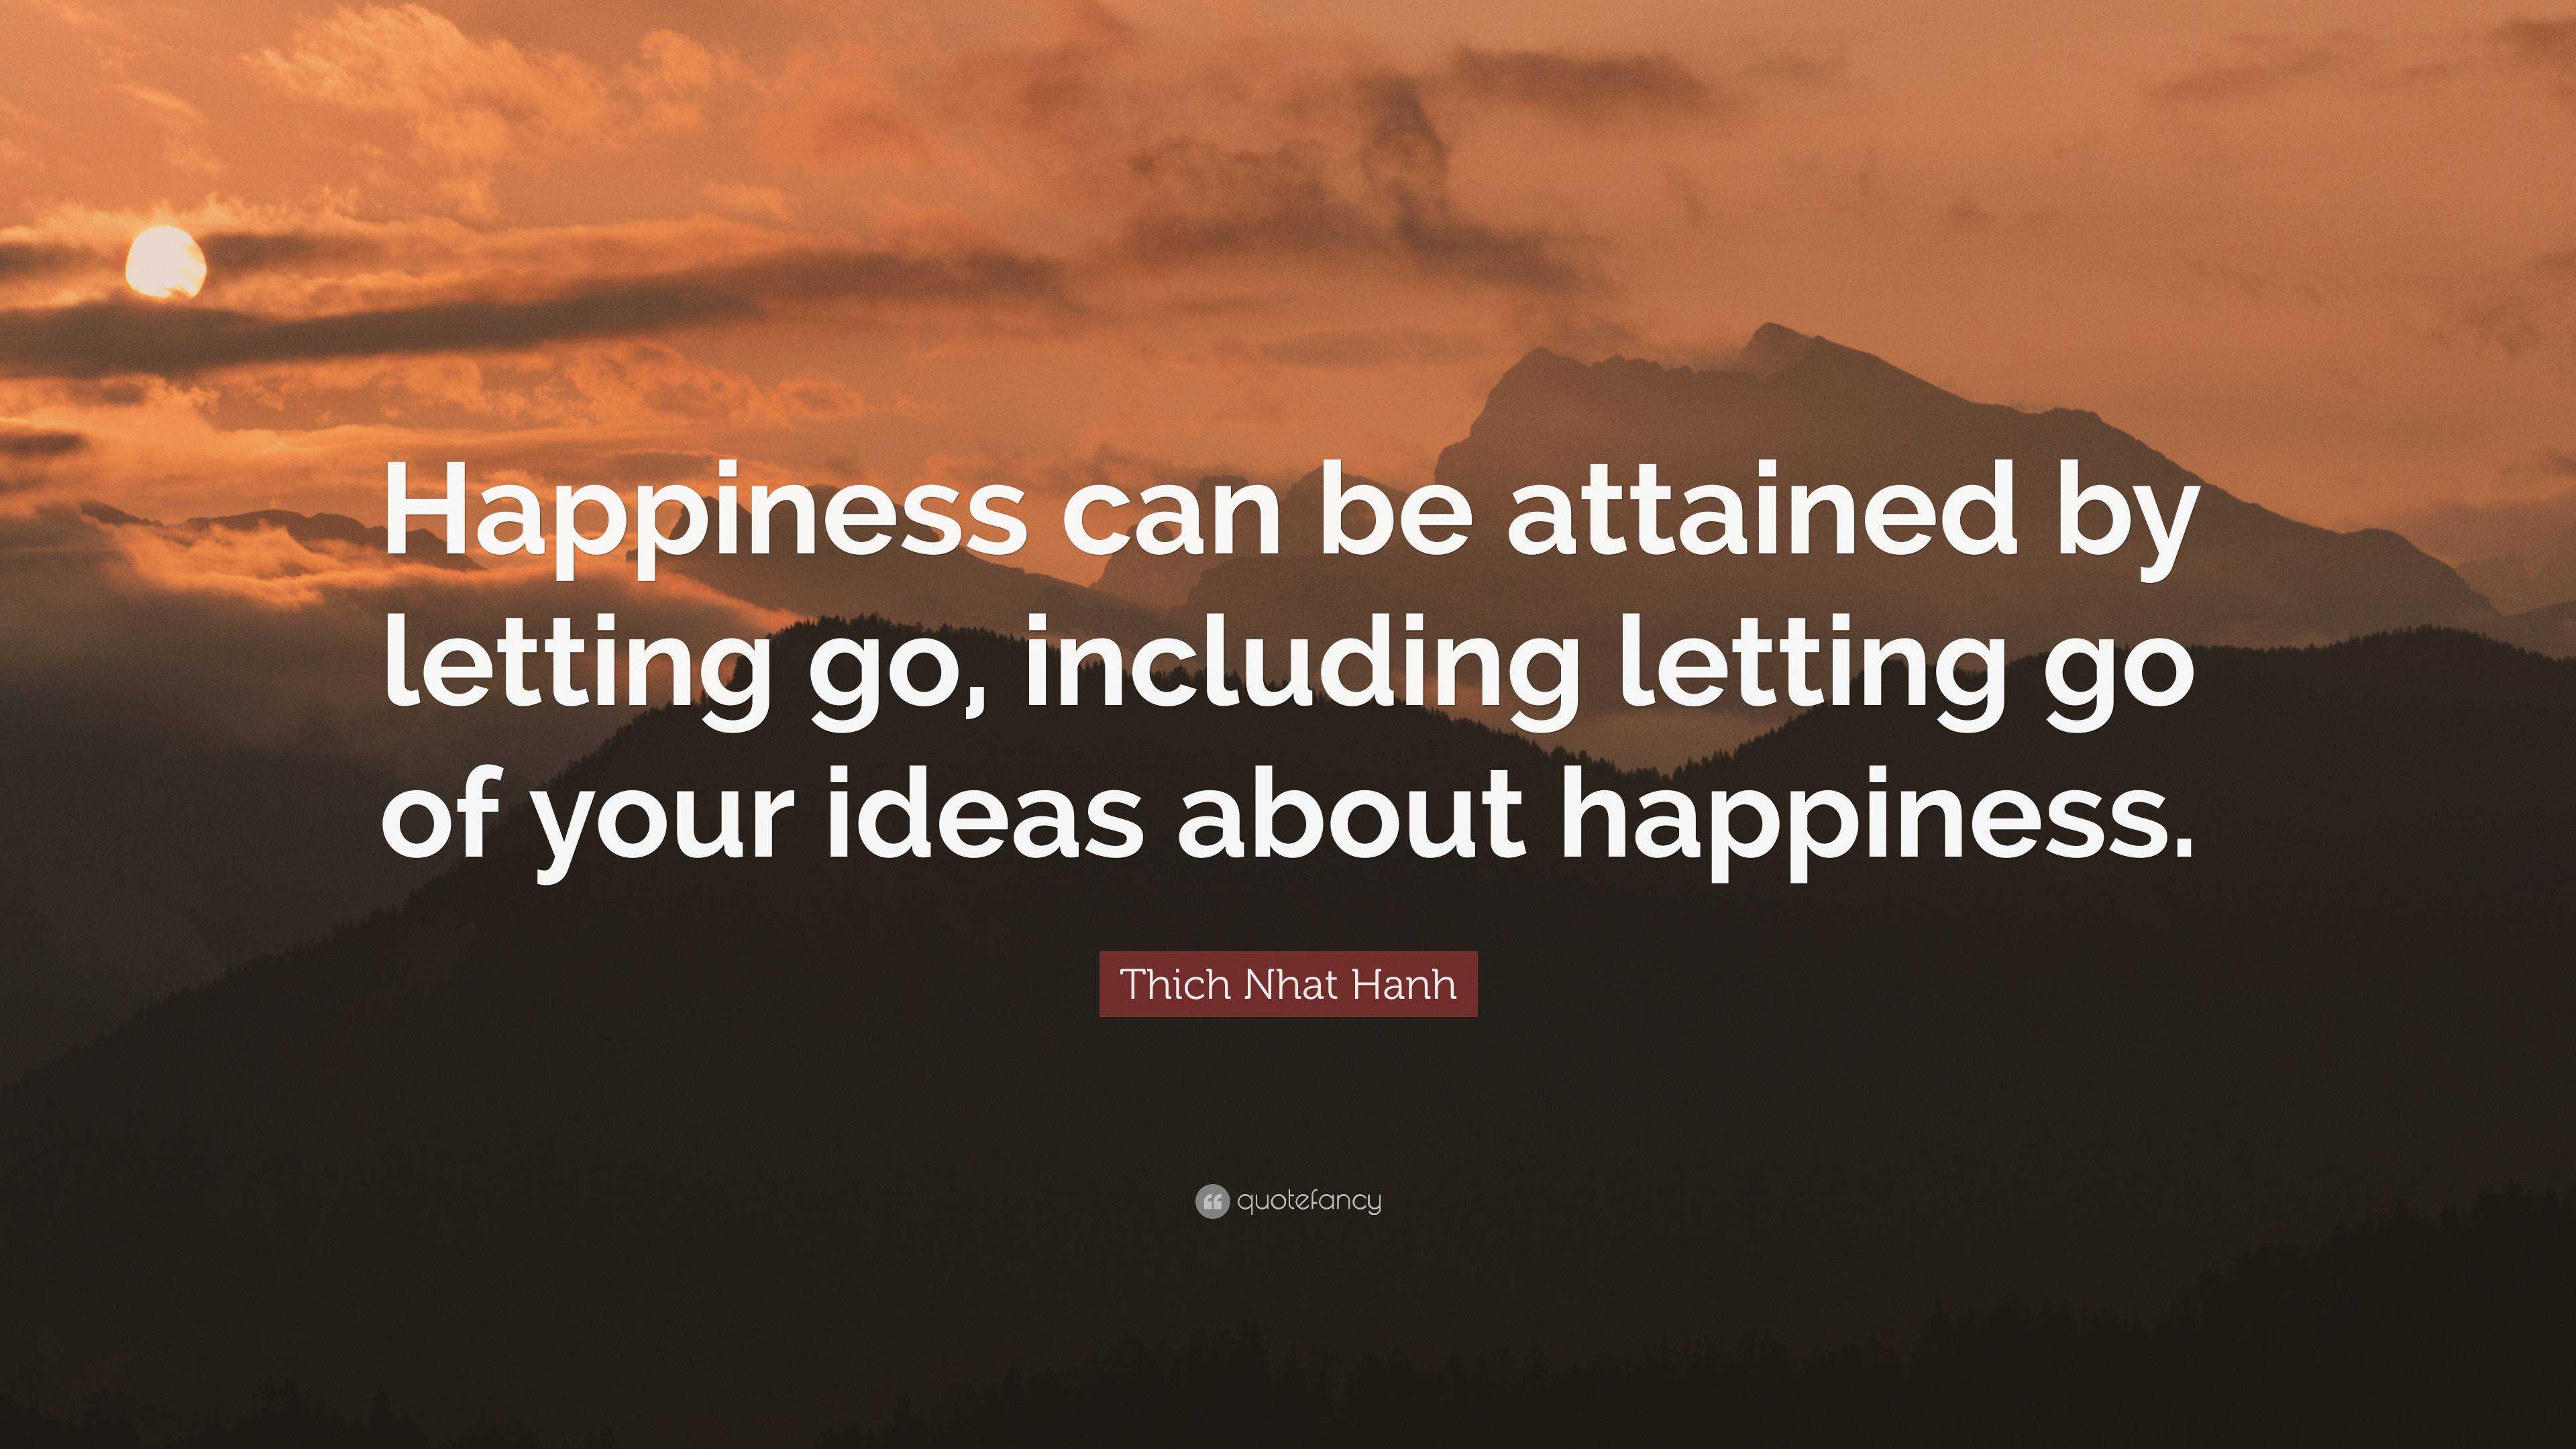 Thich Nhat Hanh Quote: “Happiness can be attained by letting go ...